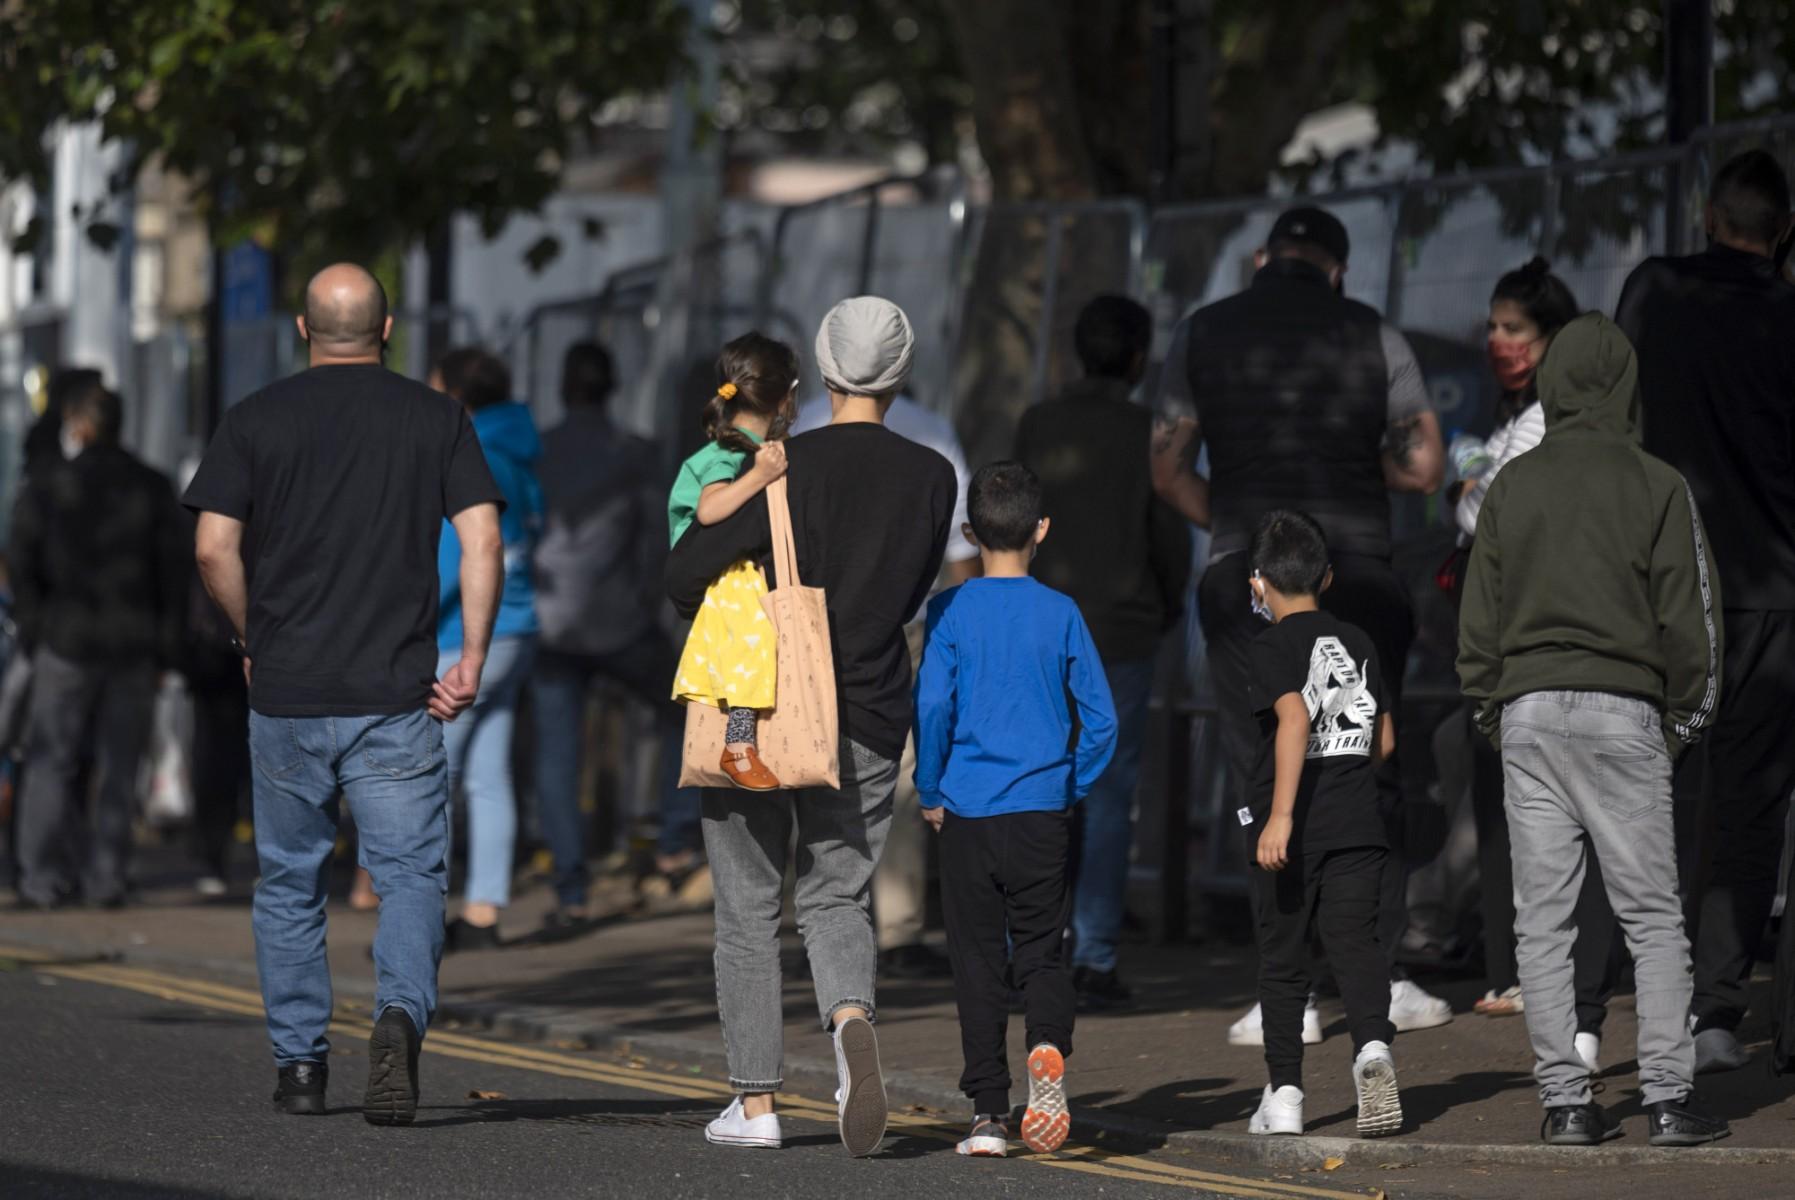 A family with young children walk past the queue to a Covid-19 testing centre in Edmonton in north London, on Sept 17, 2020. Photo: AFP